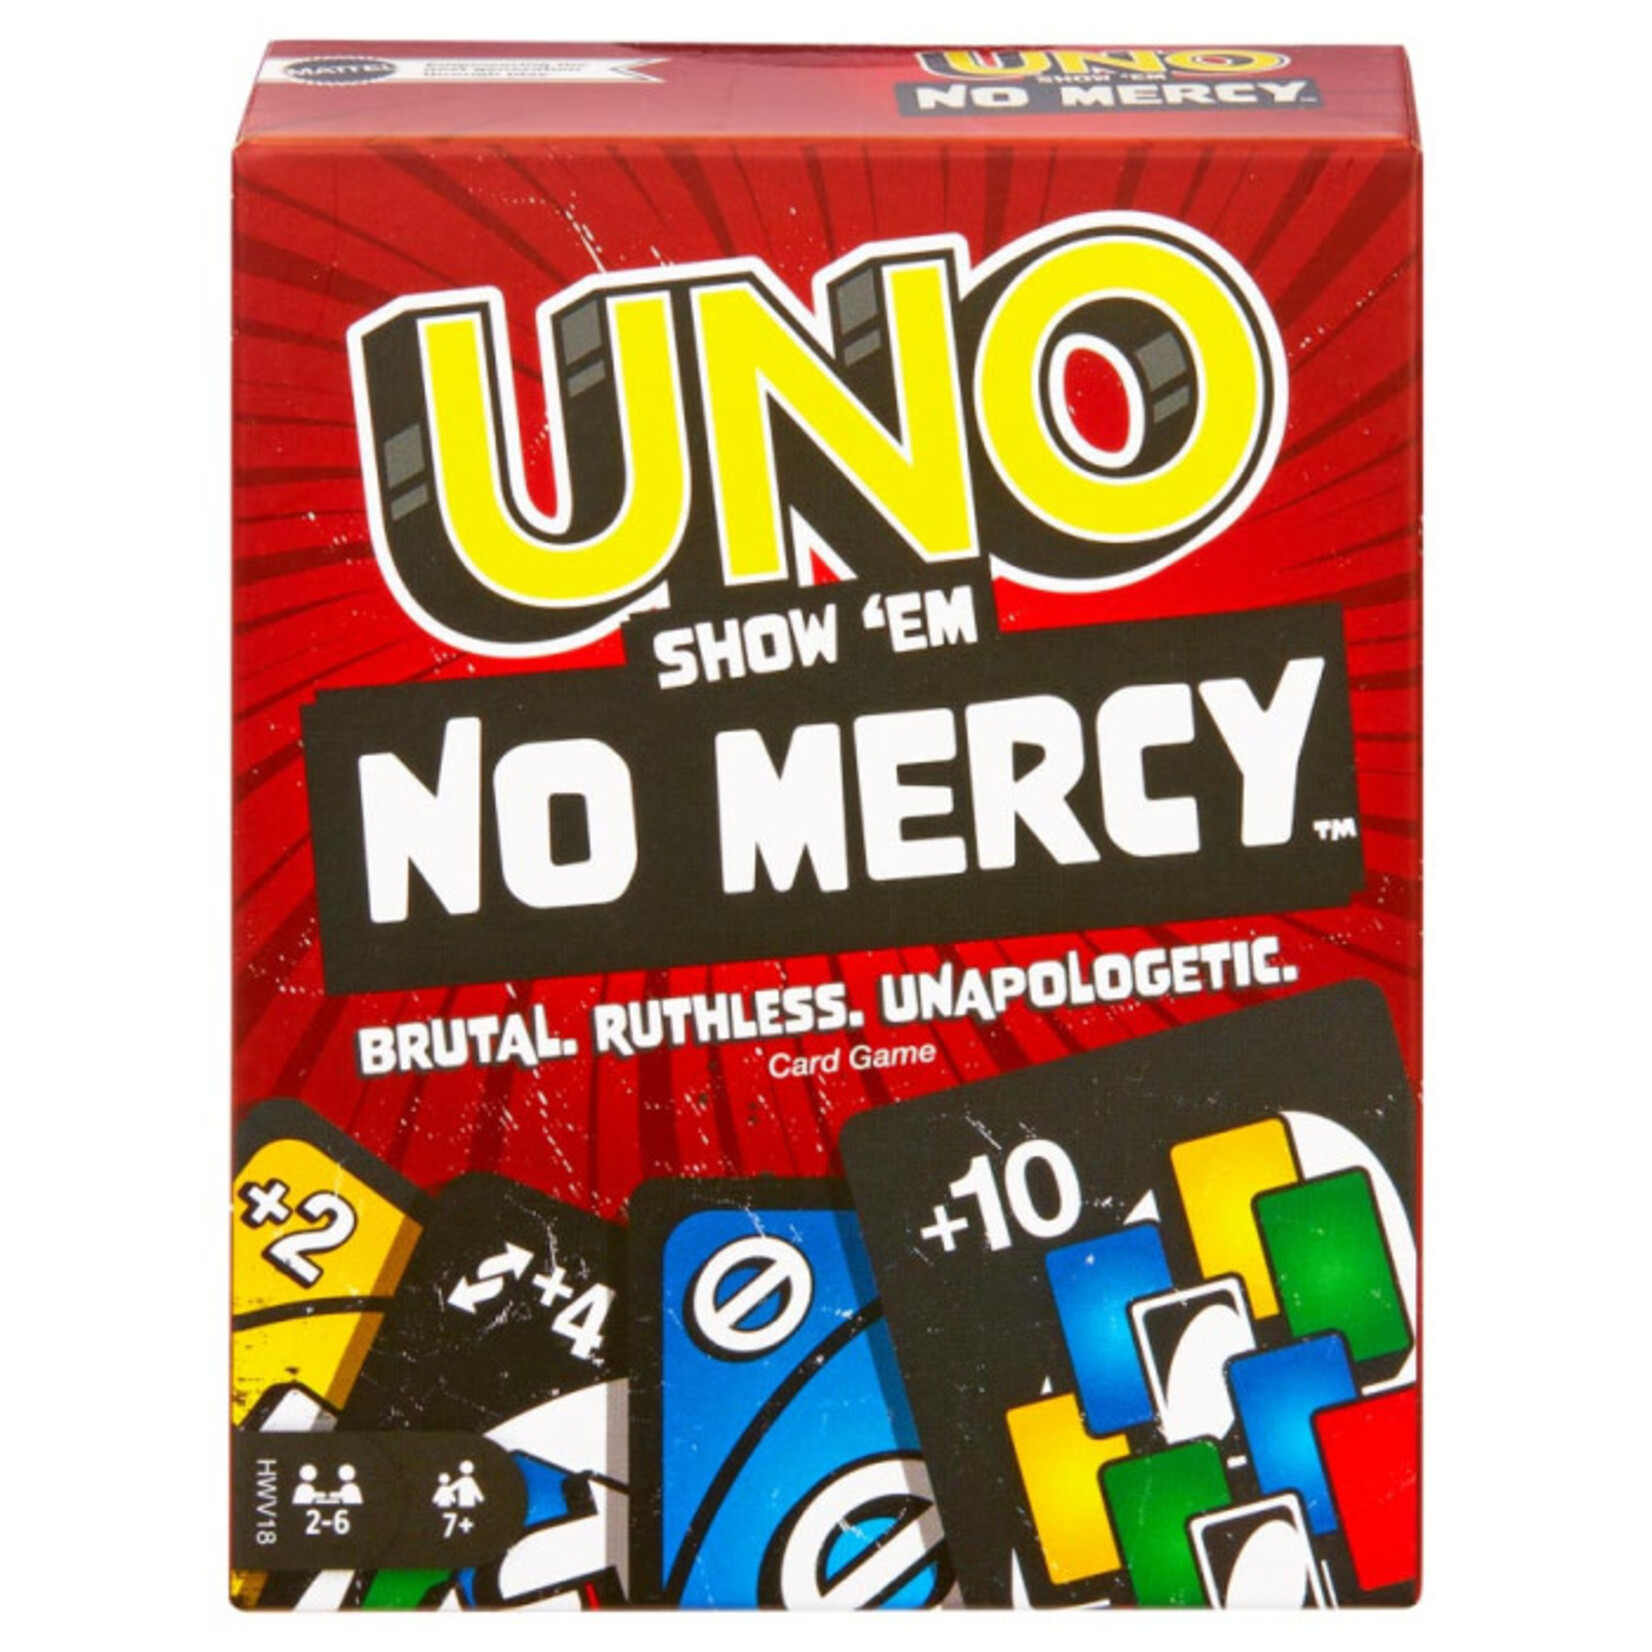 Mattel UNO: Show 'Em No Mercy – Brutal, Ruthless, Unapologetic